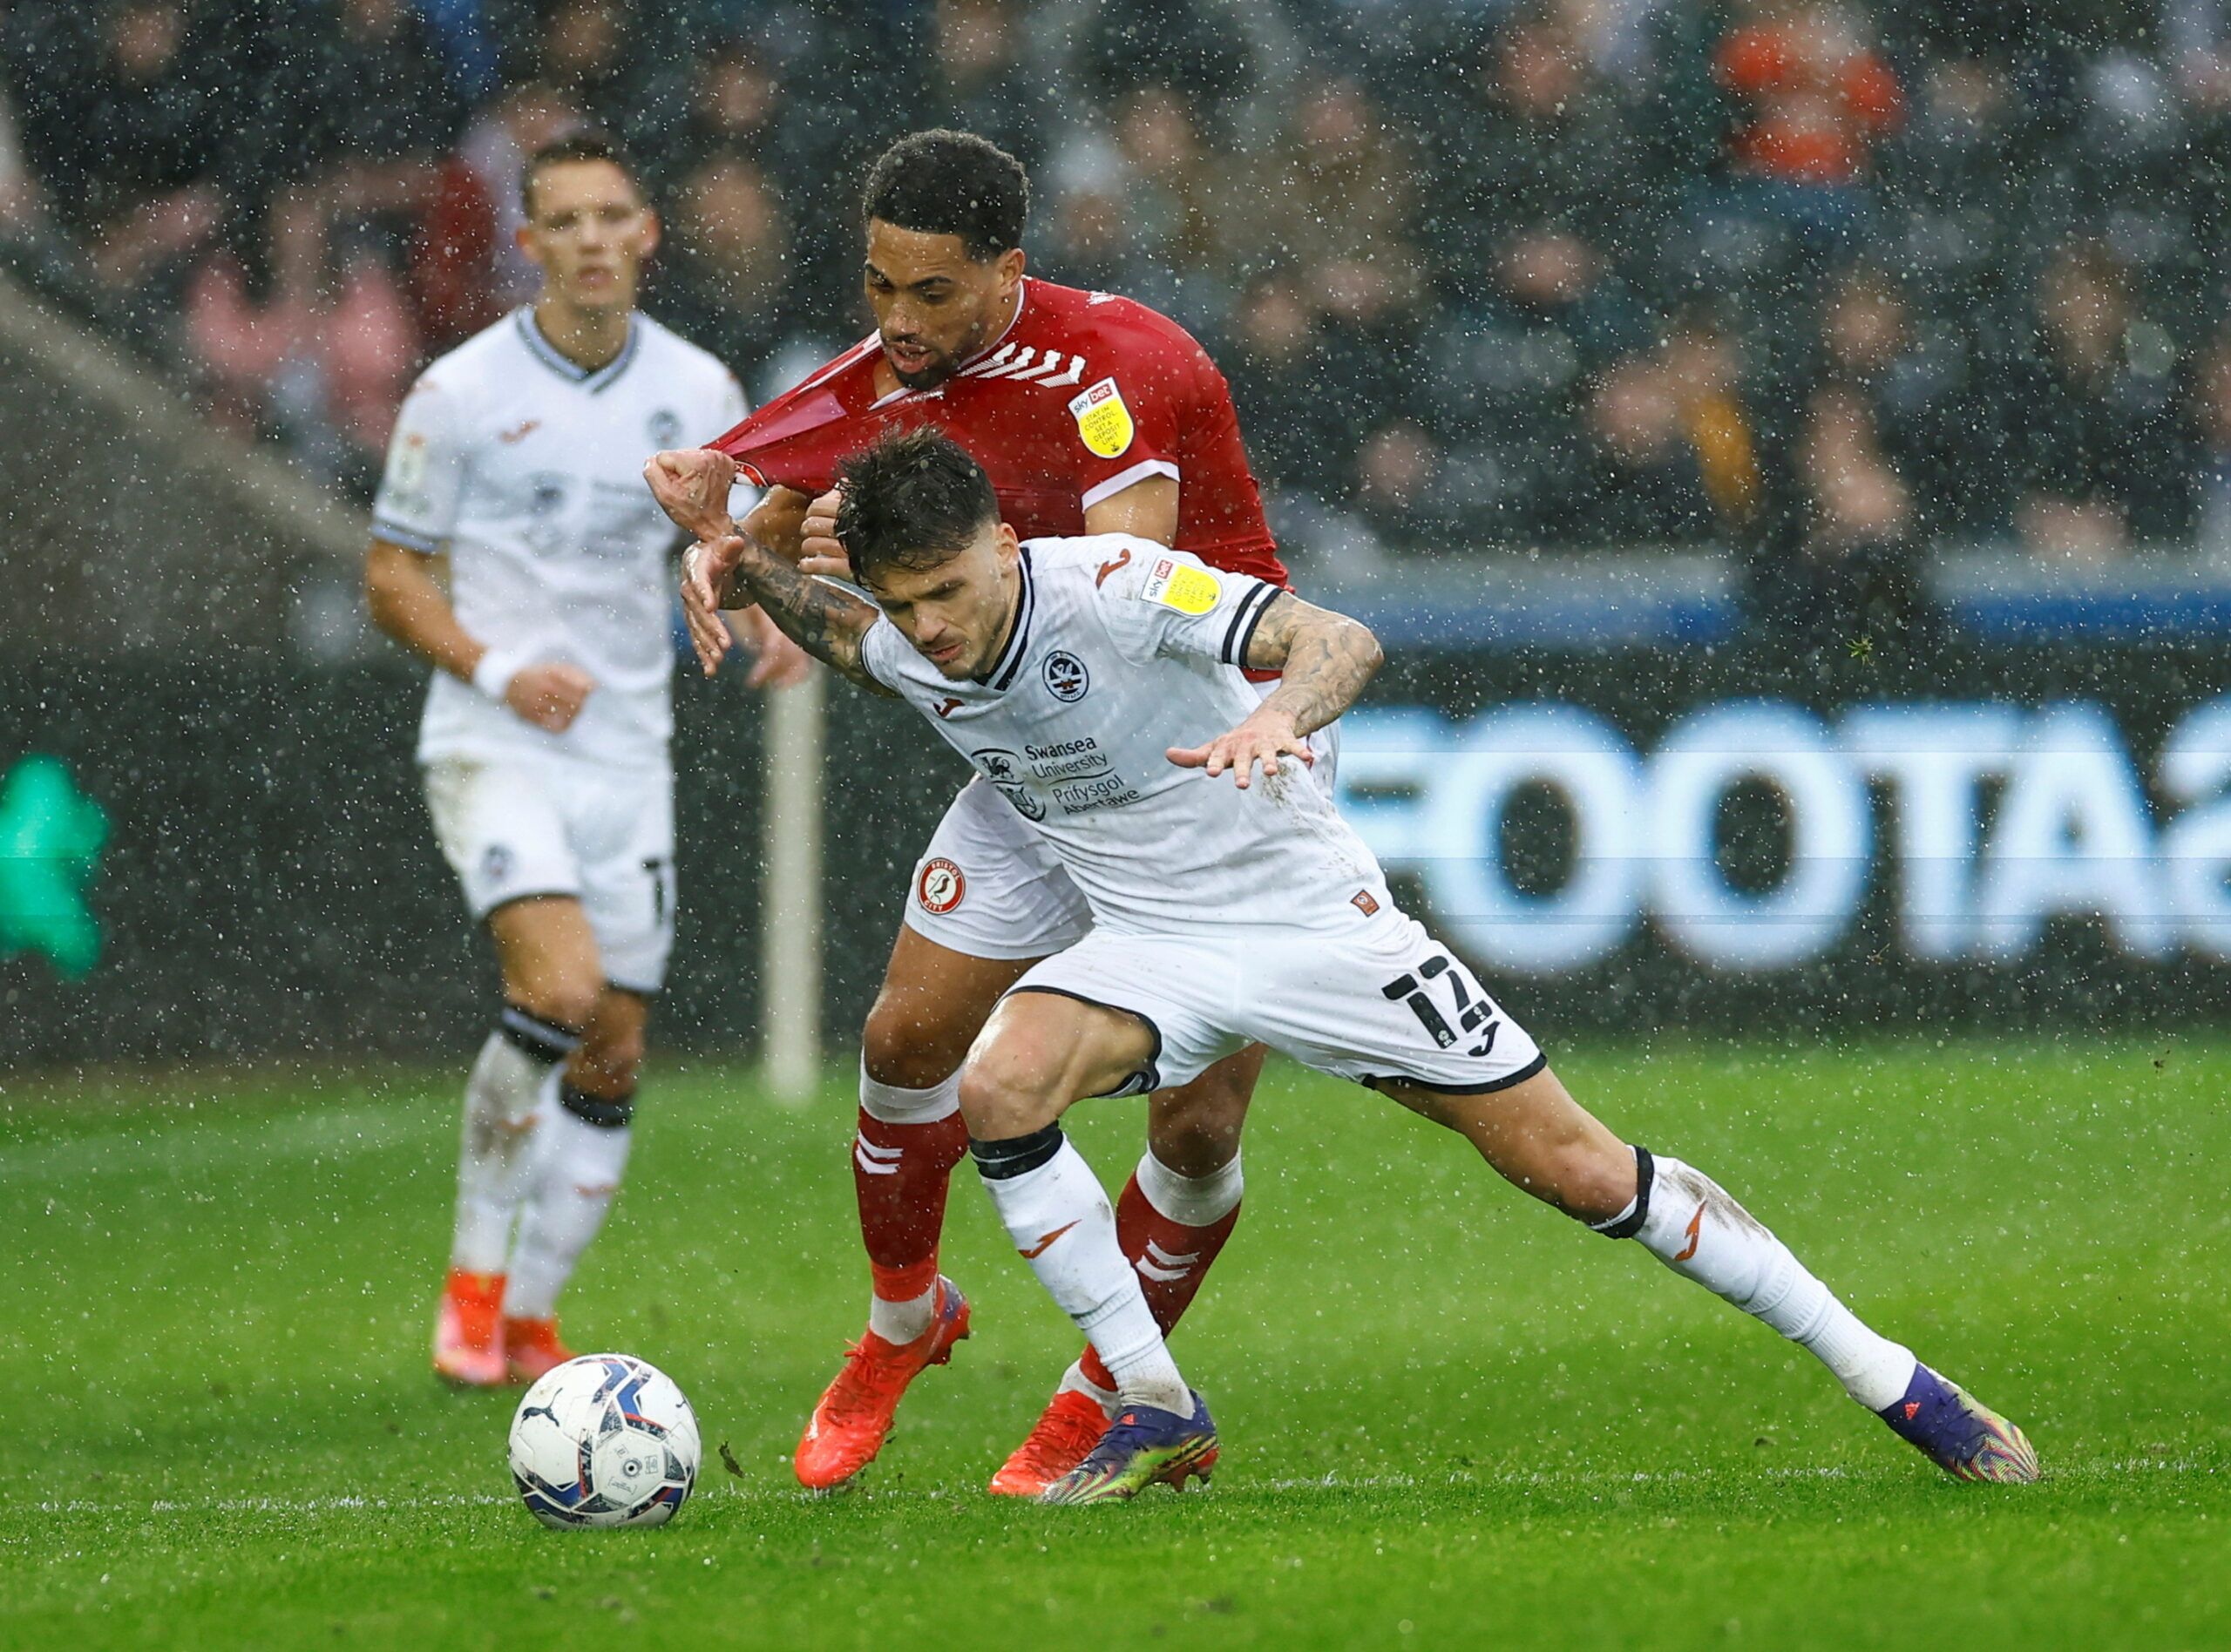 Soccer Football - Championship - Swansea City v Bristol City - Swansea.com Stadium, Swansea, Britain - February 13, 2022  Swansea City's Jamie Paterson in action with Bristol City's Zak Vyner  Action Images/Andrew Boyers  EDITORIAL USE ONLY. No use with unauthorized audio, video, data, fixture lists, club/league logos or 